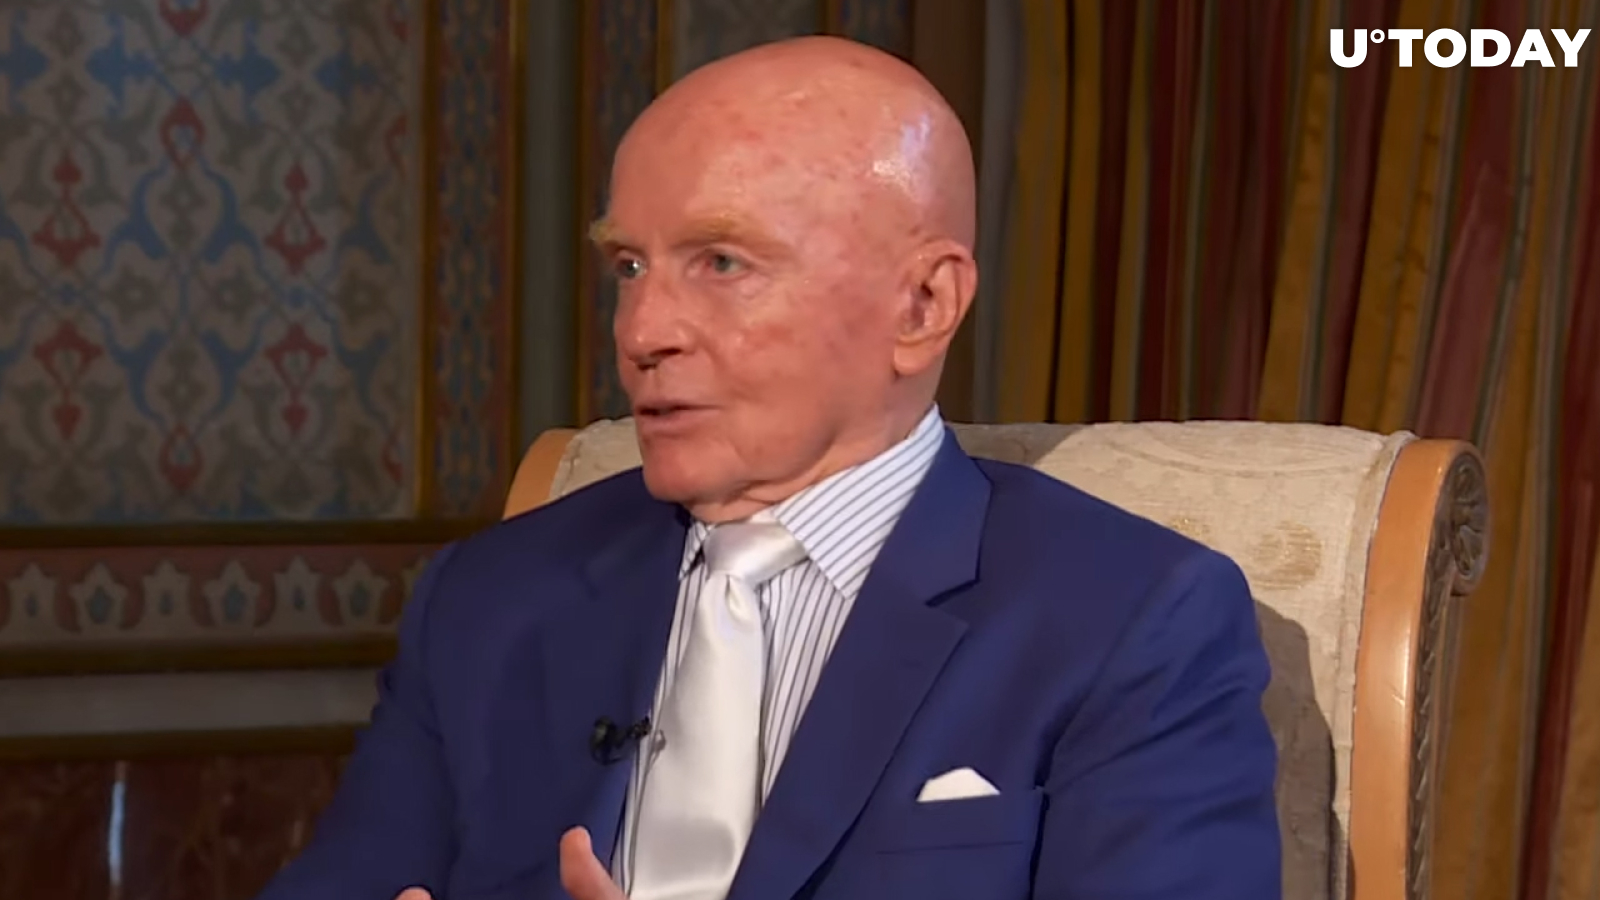 Bitcoiners Could Face "Real Trouble," Says Legendary Investor Mark Mobius